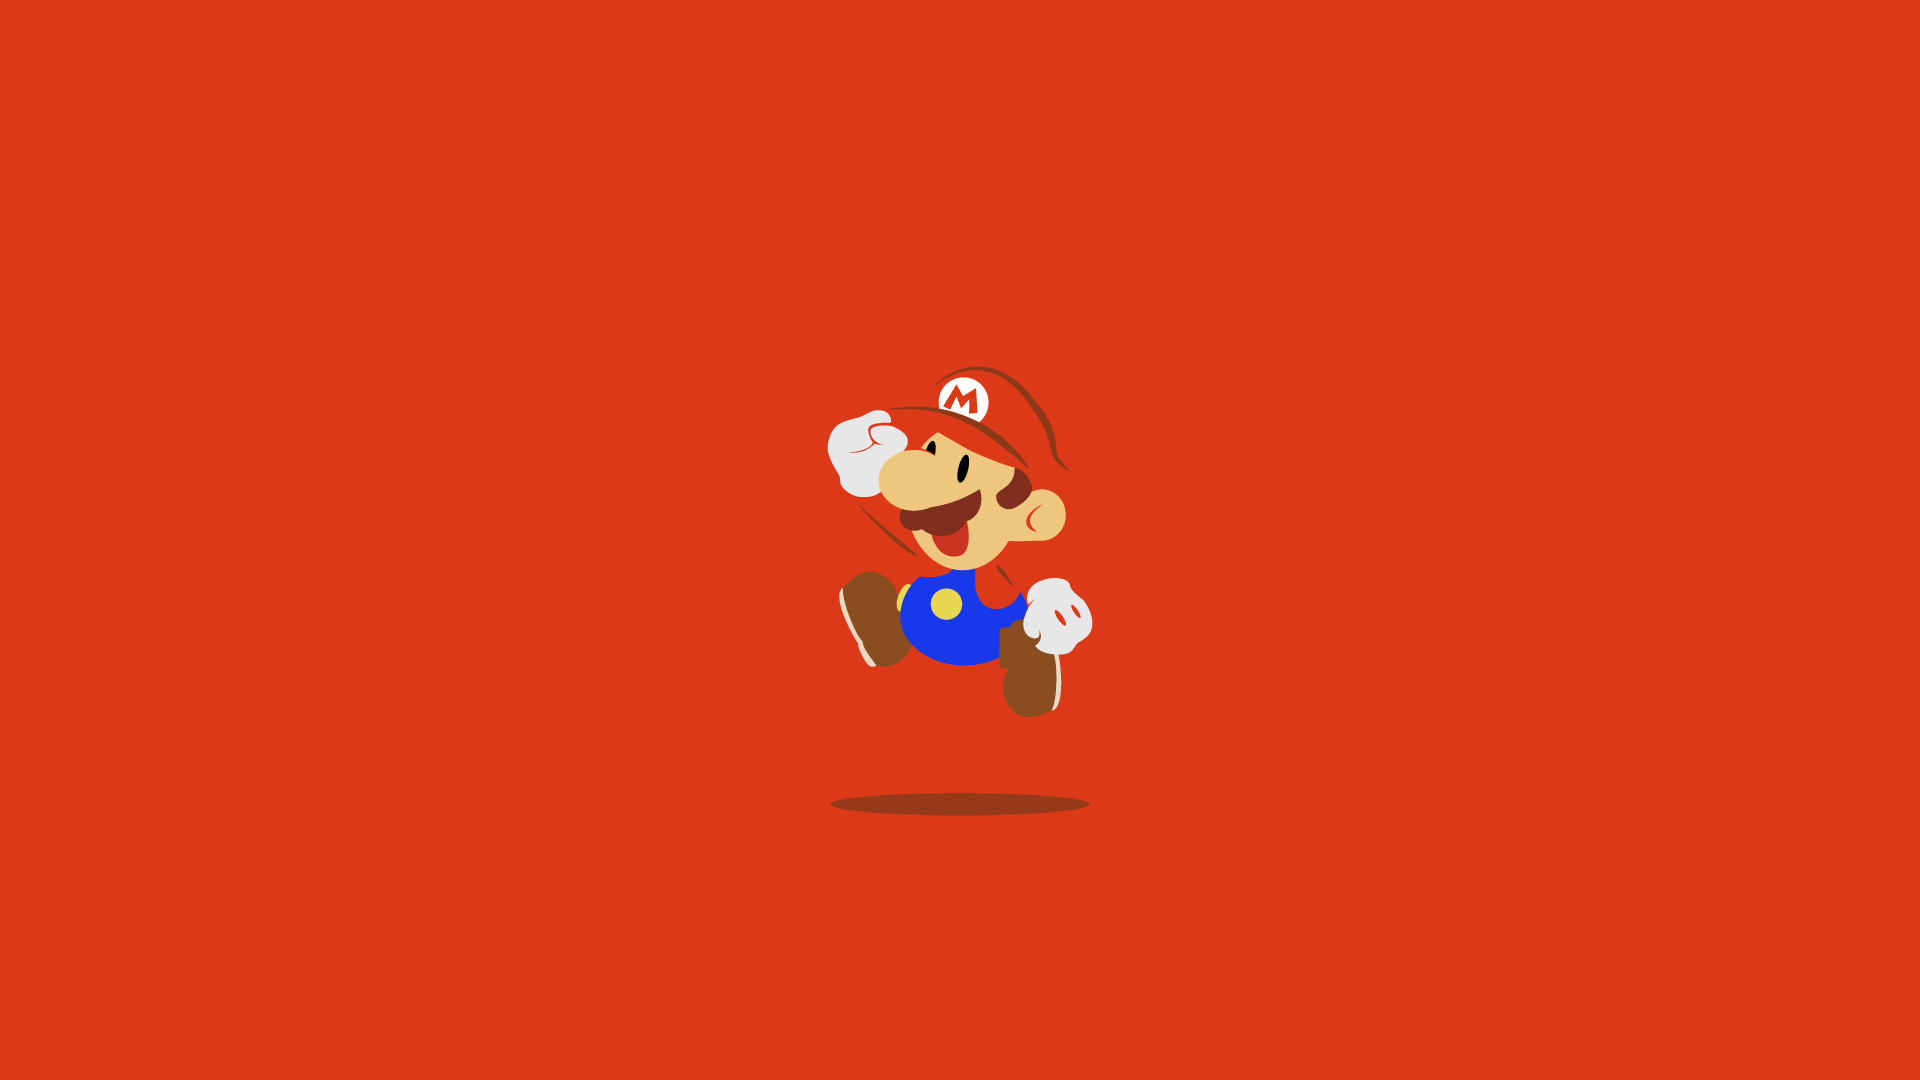 1920x1080 Red desktop wallpaper with Super Mario jumping.